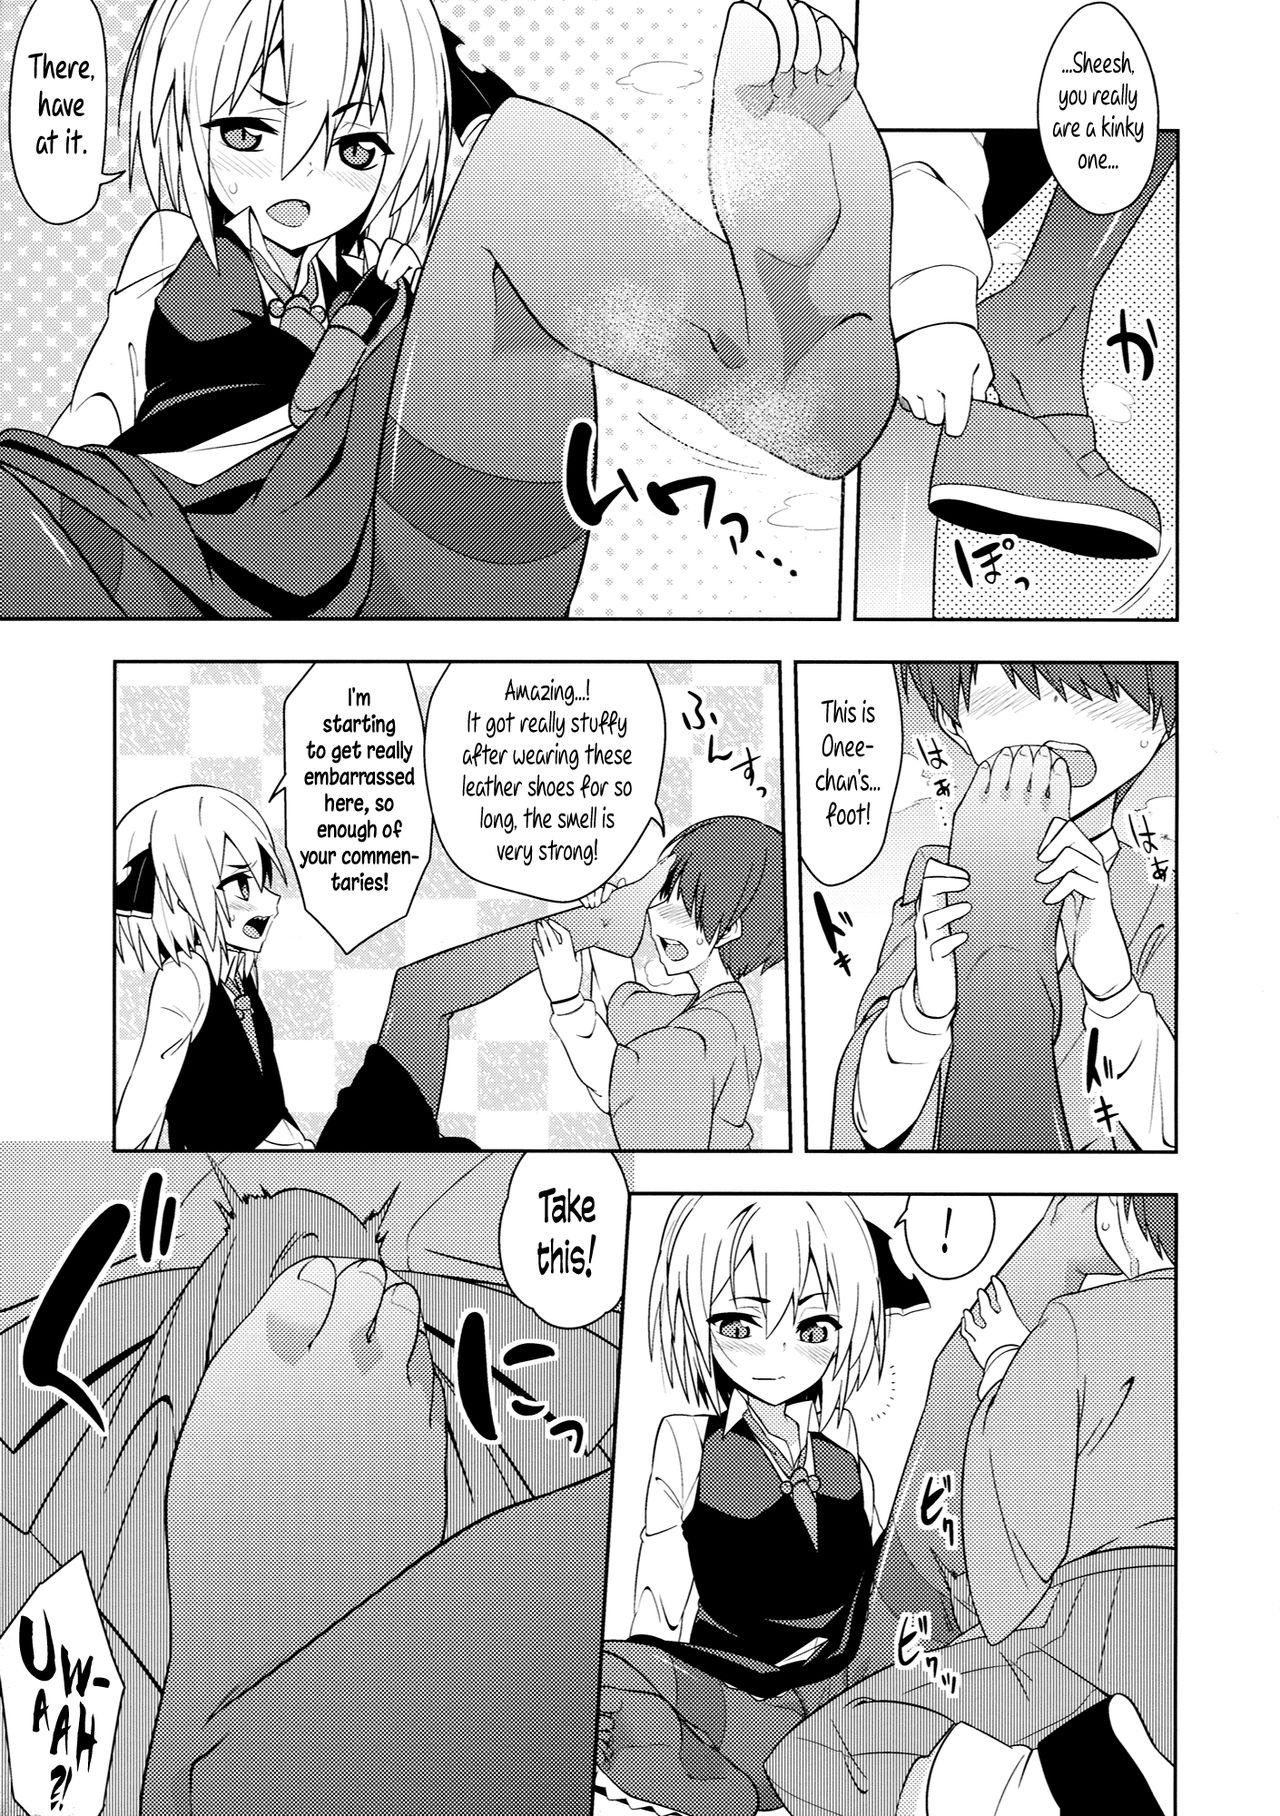 Assfuck Rumia Aratta？| Have you washed, Rumia? - Touhou project Licking Pussy - Page 6